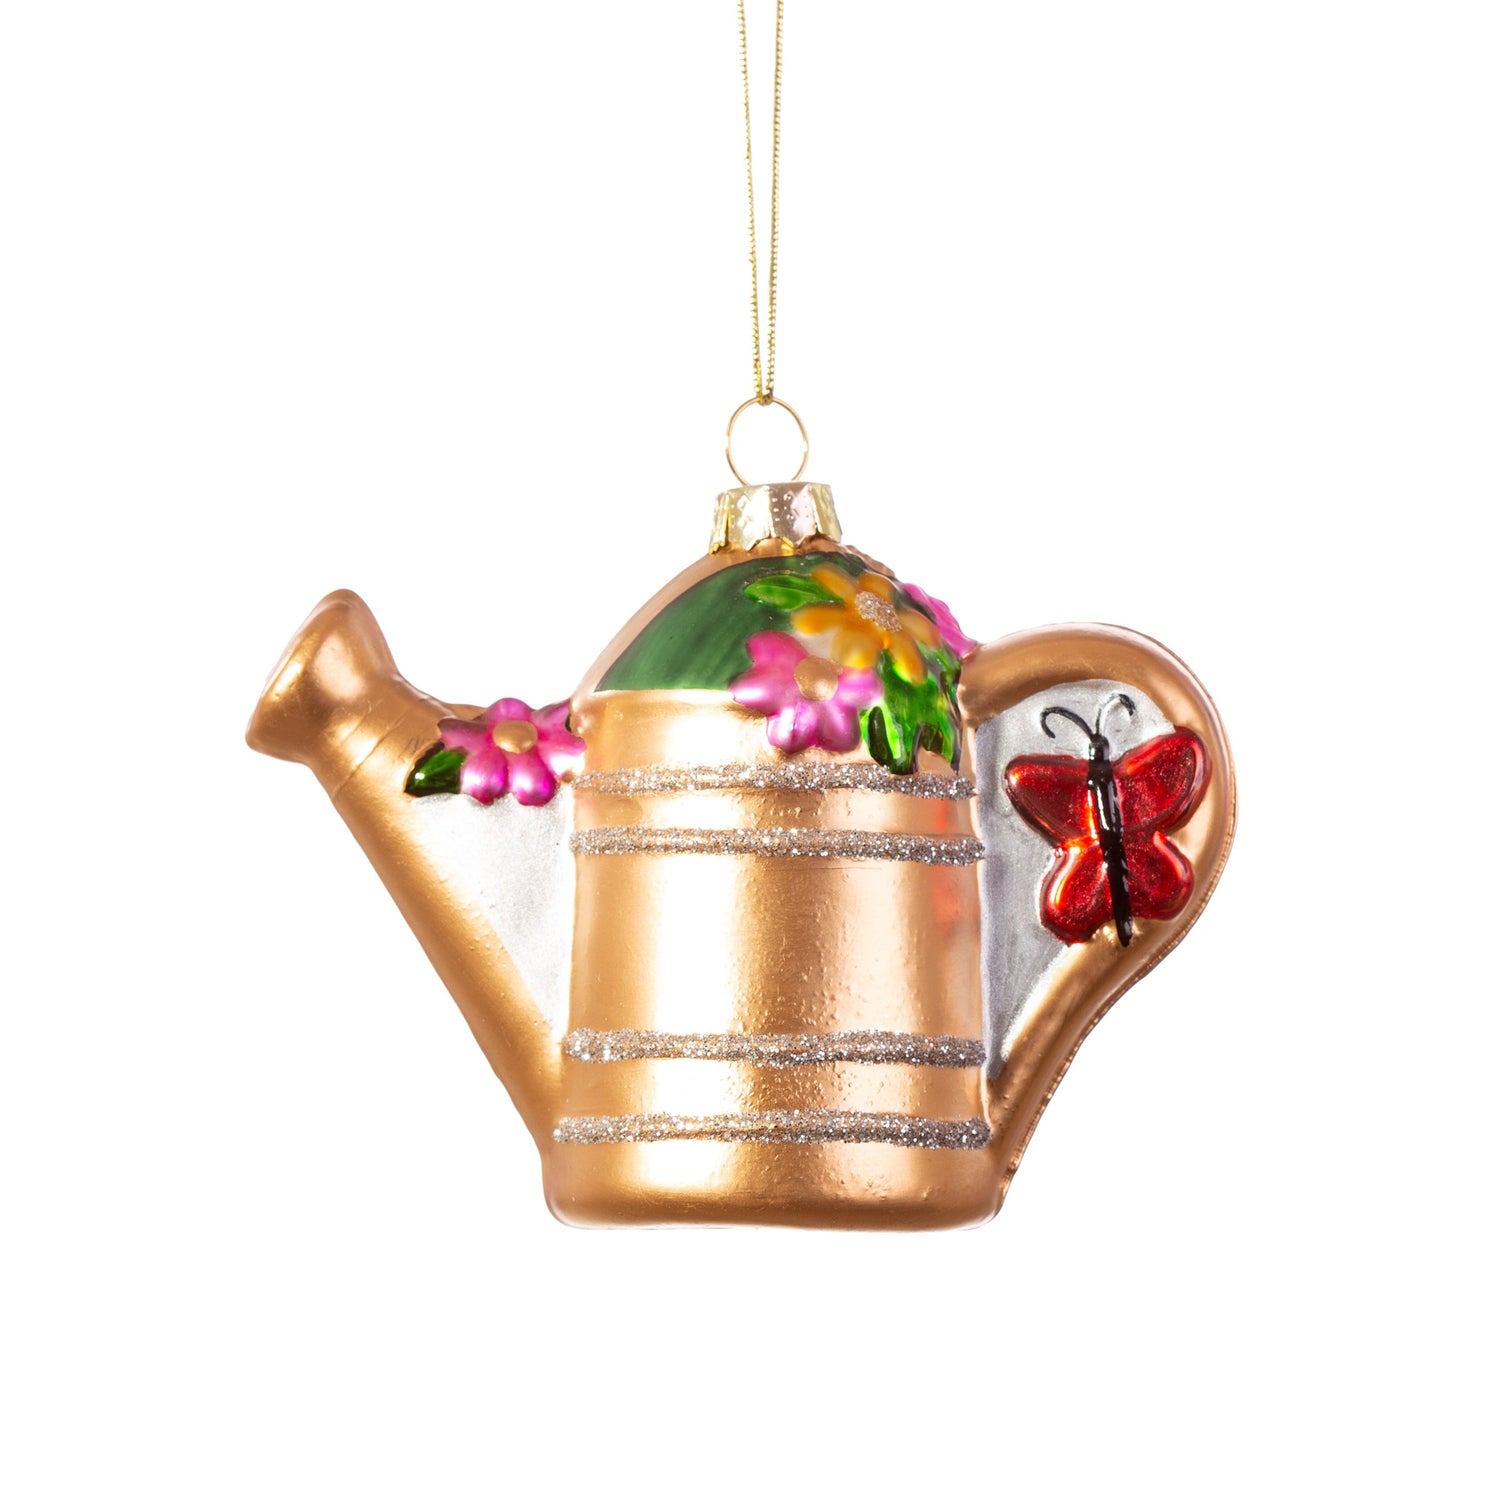 This miniature watering can glass Christmas decoration is very cute, and features beautiful butterflies! Perfect gift for your green fingered friends!